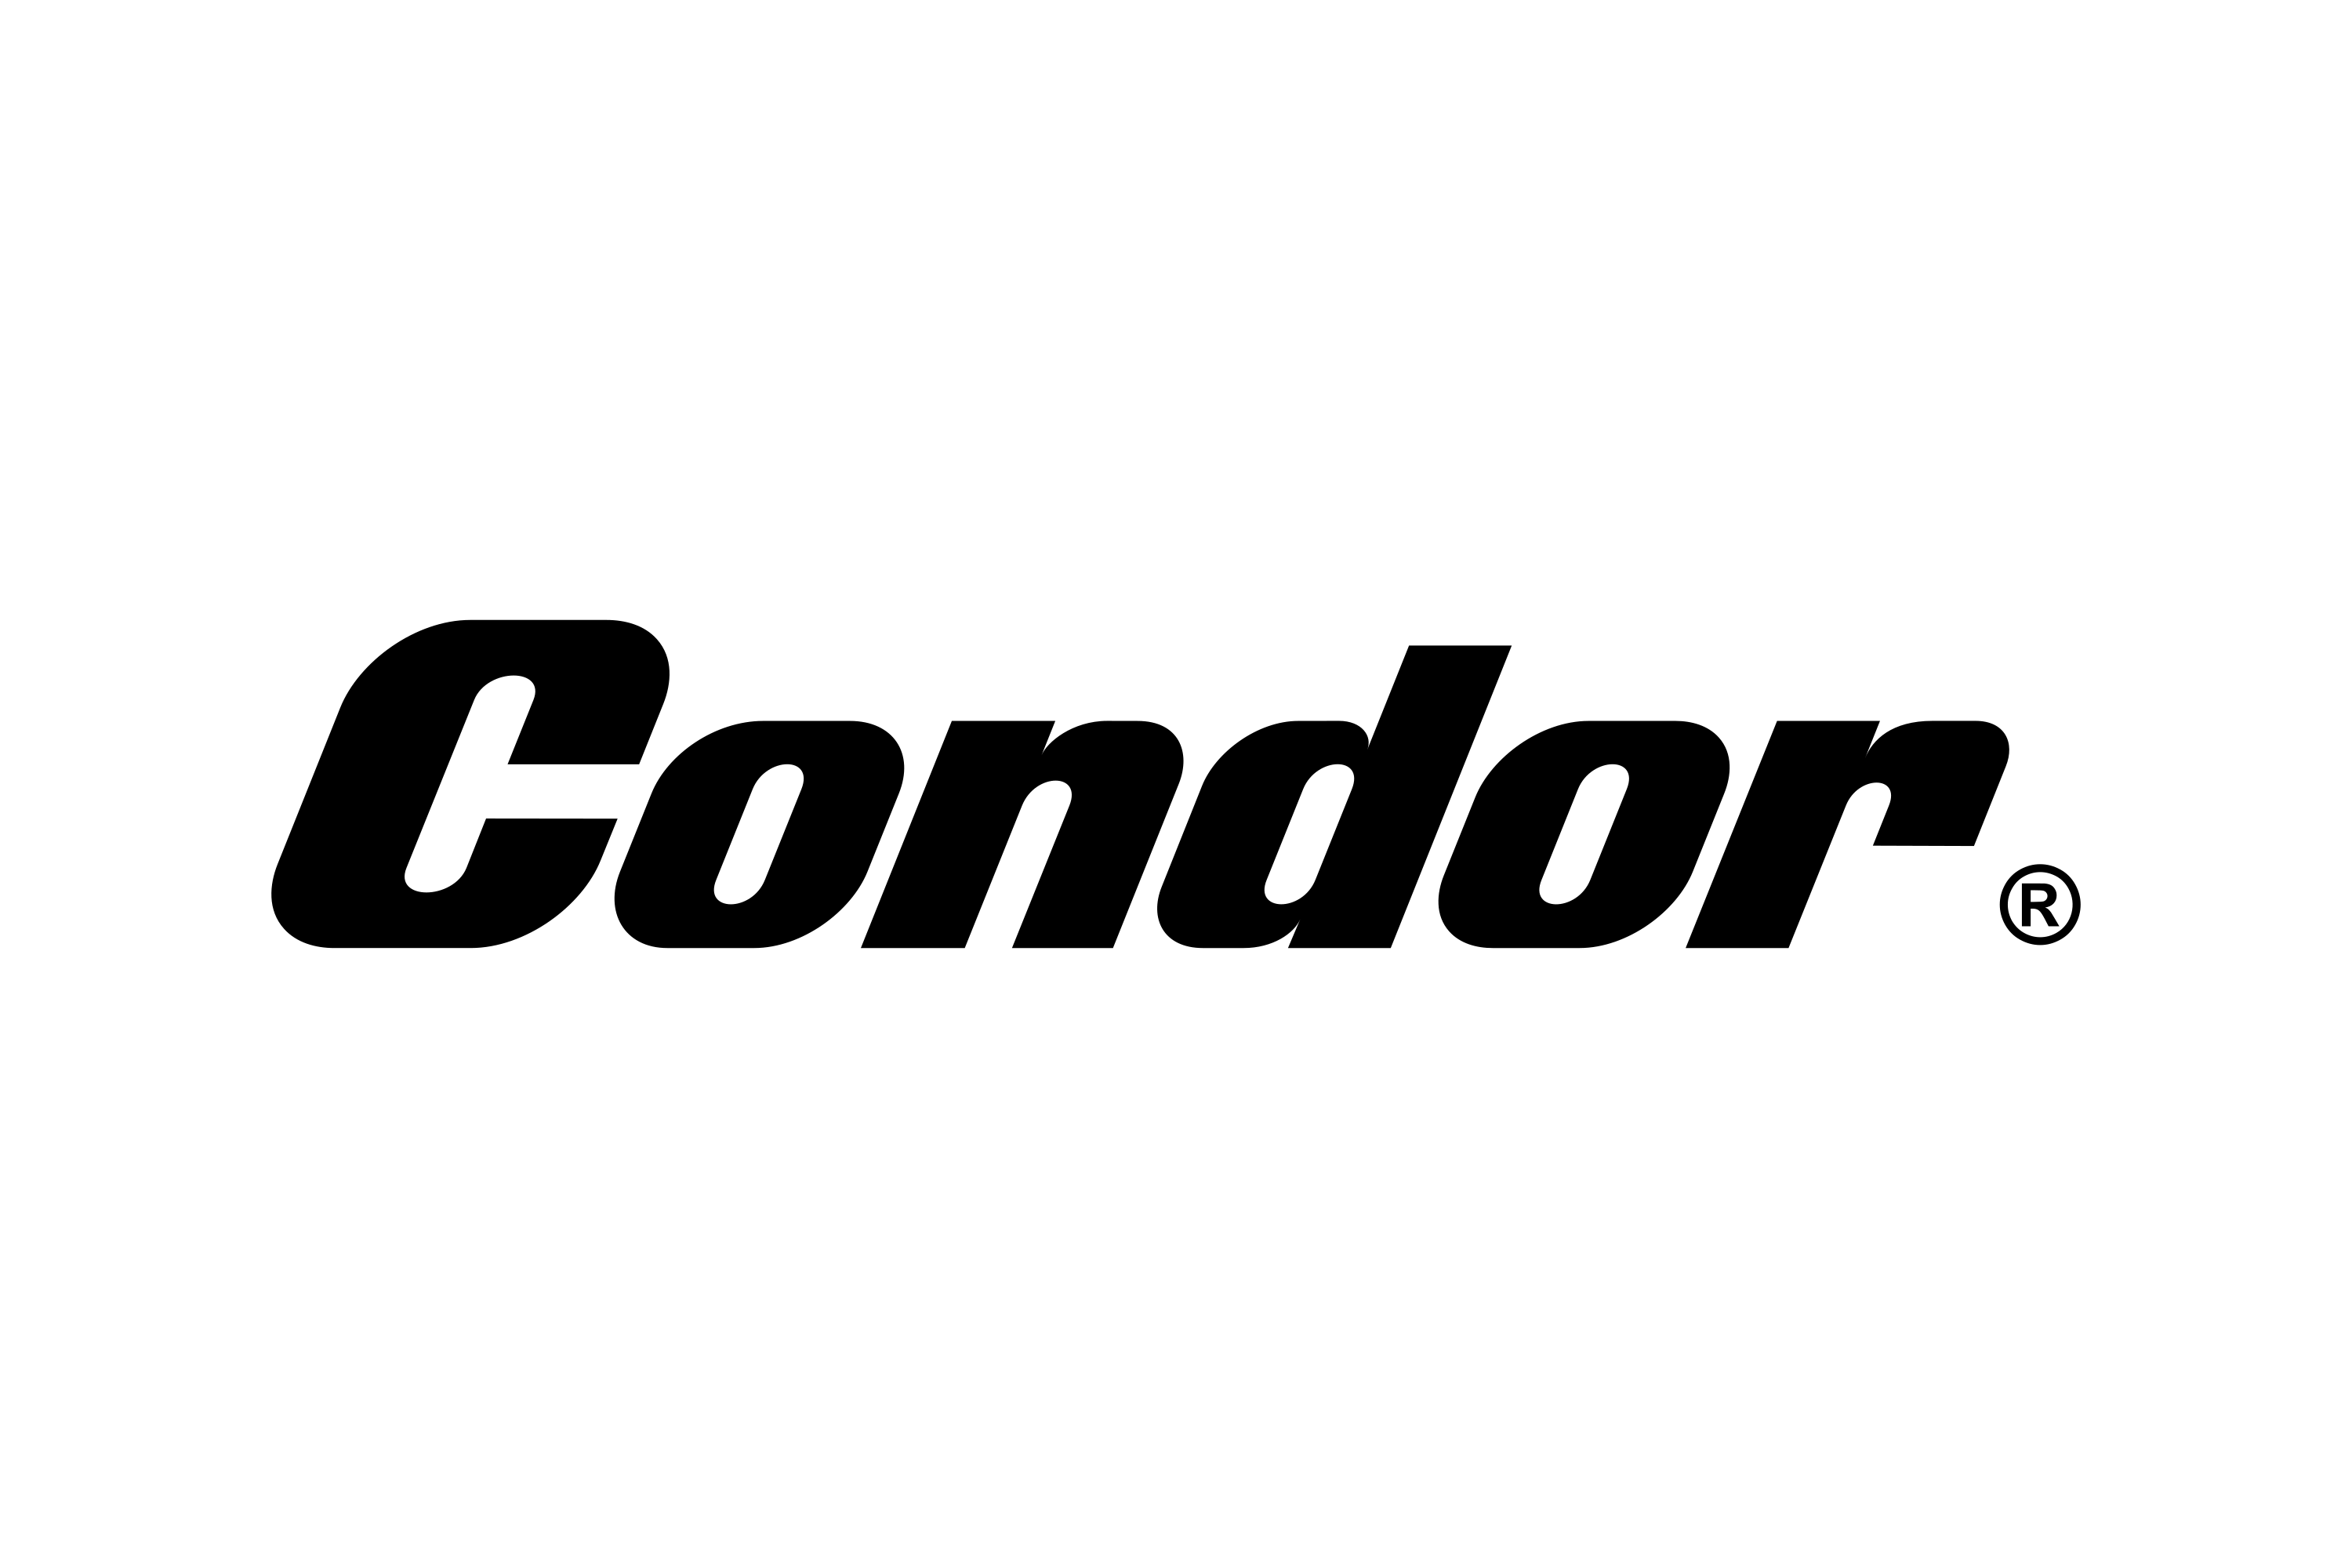 Download Condor Cycles Logo in SVG Vector or PNG File Format - Logo.wine